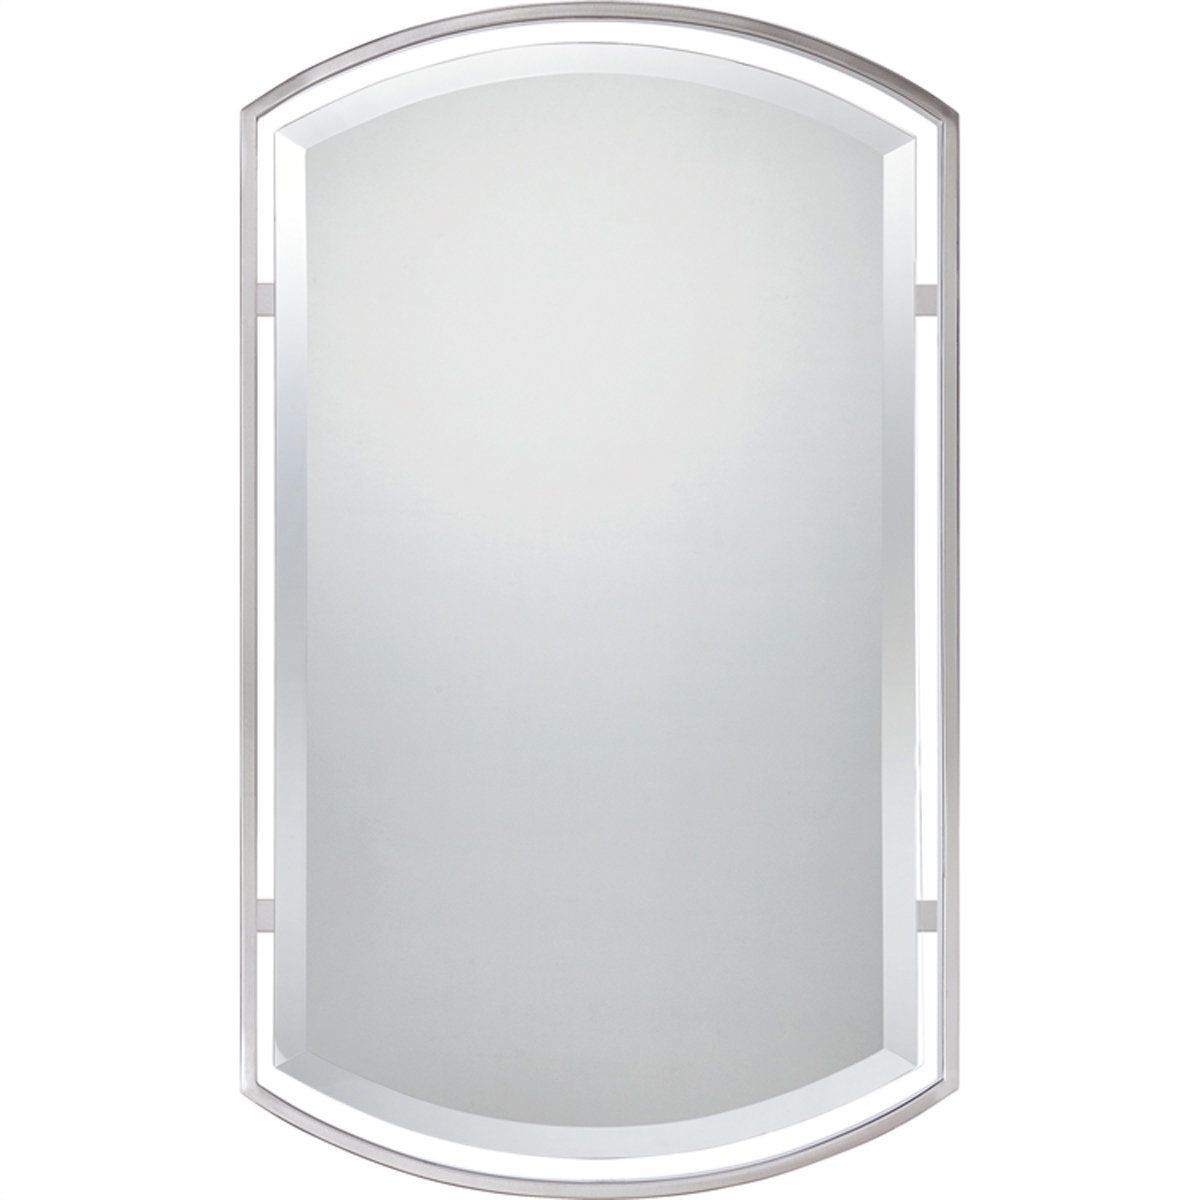 Floating Frame Rounded Rectangular Mirror In 2021 | Brushed Nickel Inside Oxidized Nickel Wall Mirrors (View 5 of 15)